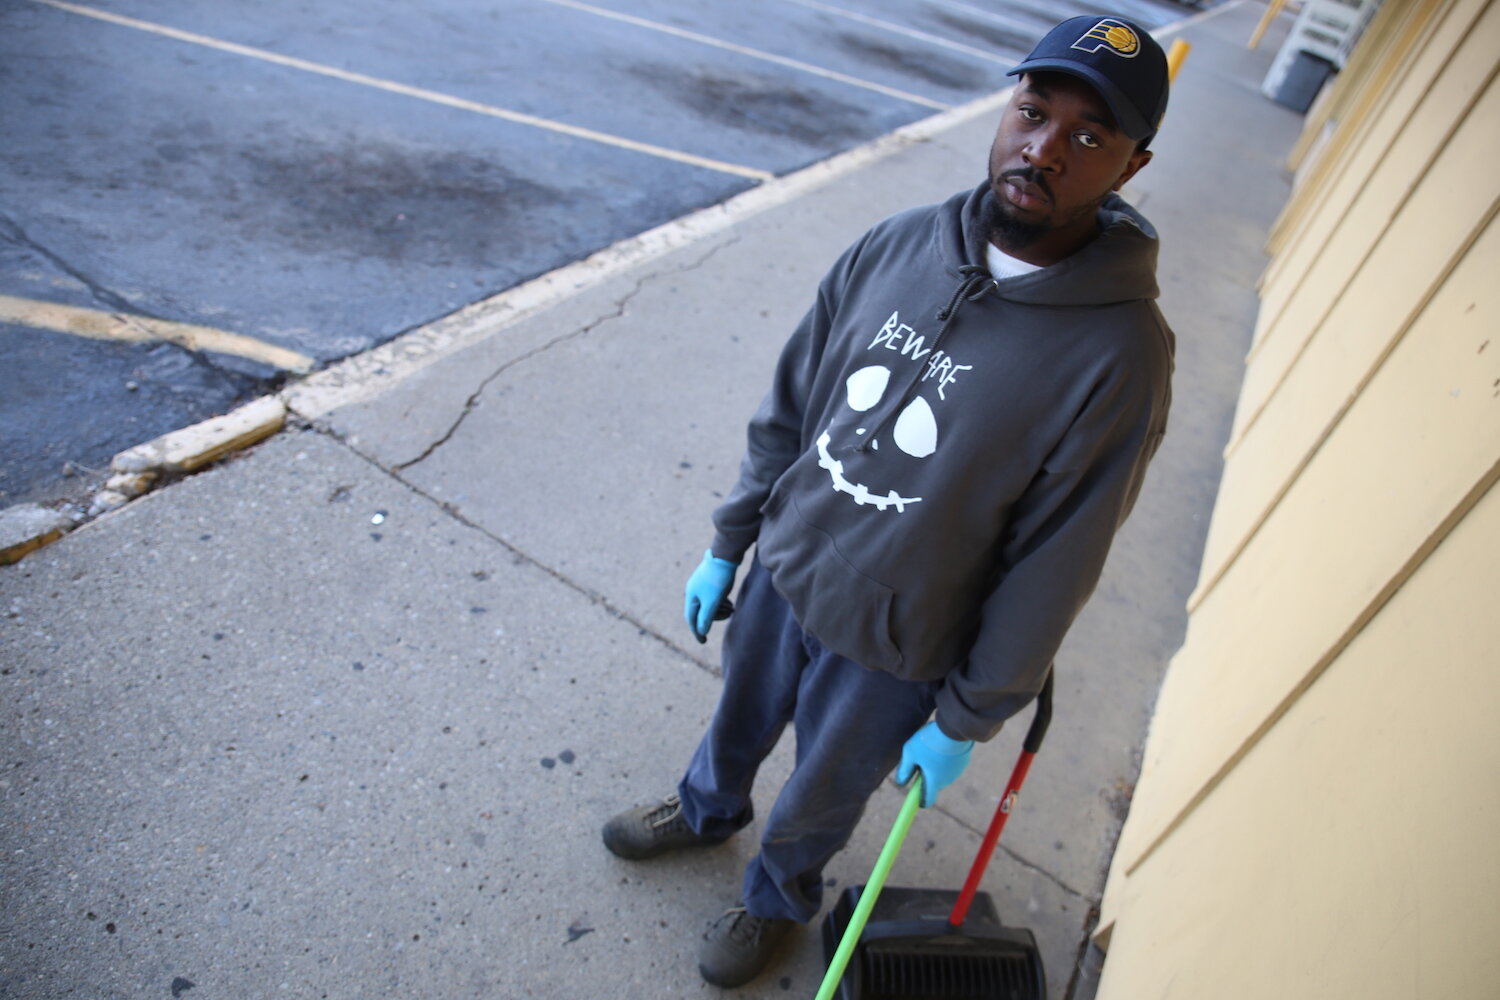 Isaac Fincher of Clean Lot Solutions LLC is building up business on the South side in more ways than one.